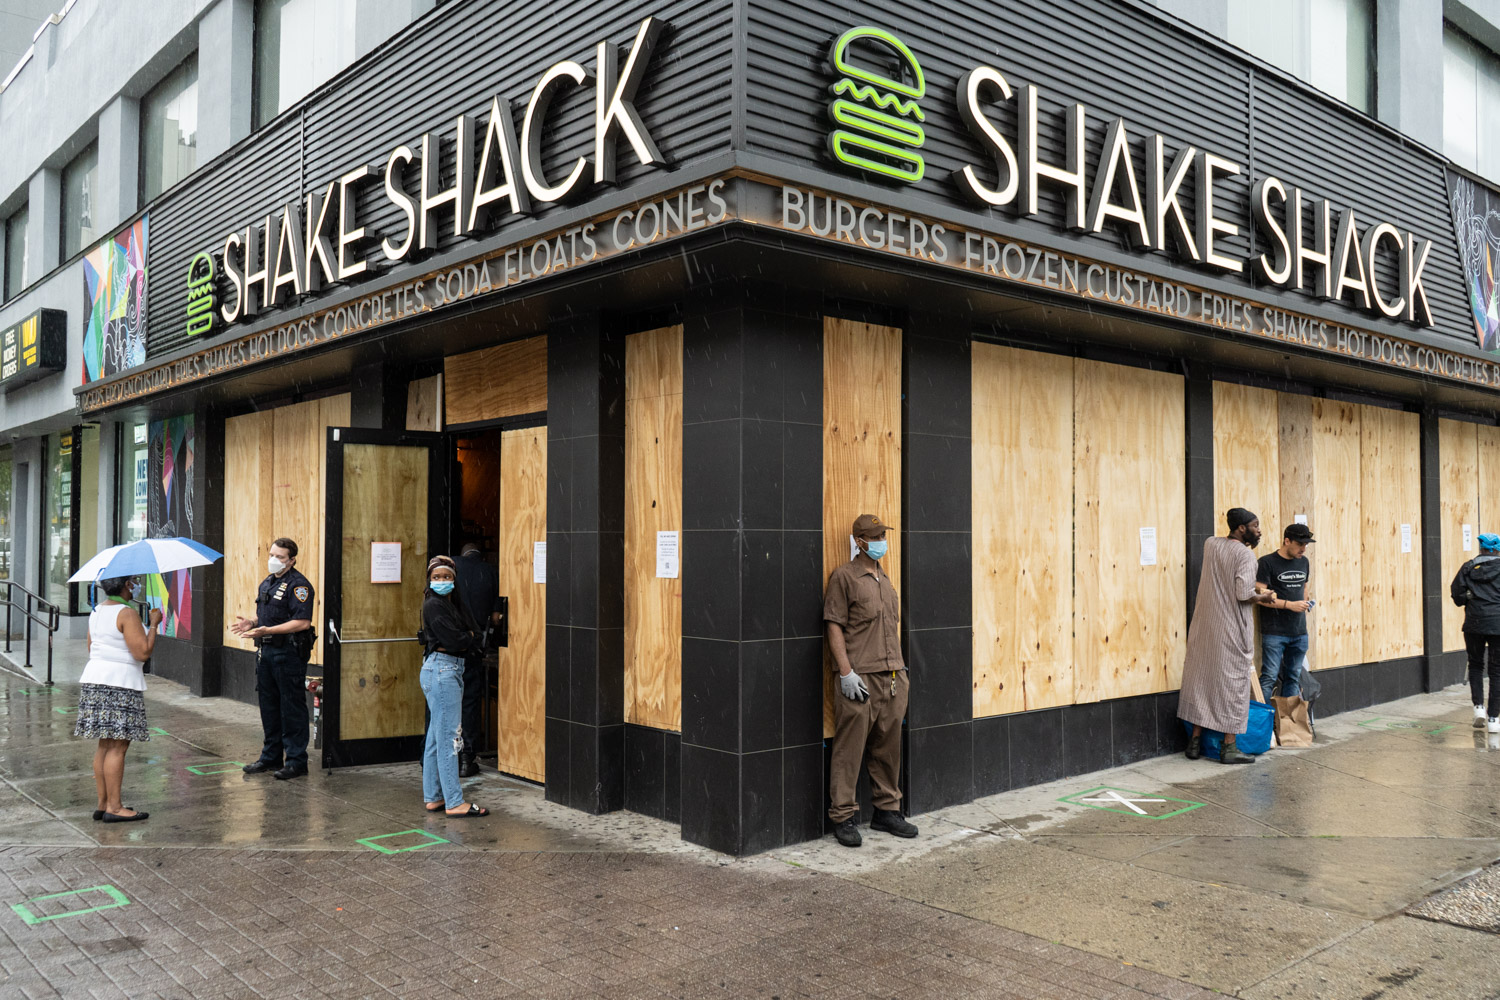 June 3, 2020: An open but boarded up Shake Shack in the aftermath of the violence and looting precipitated by the killing of George Floyd in Minneapolis; Fifth Avenue at 125th Street, Harlem, New York, New York. © Camilo José Vergara